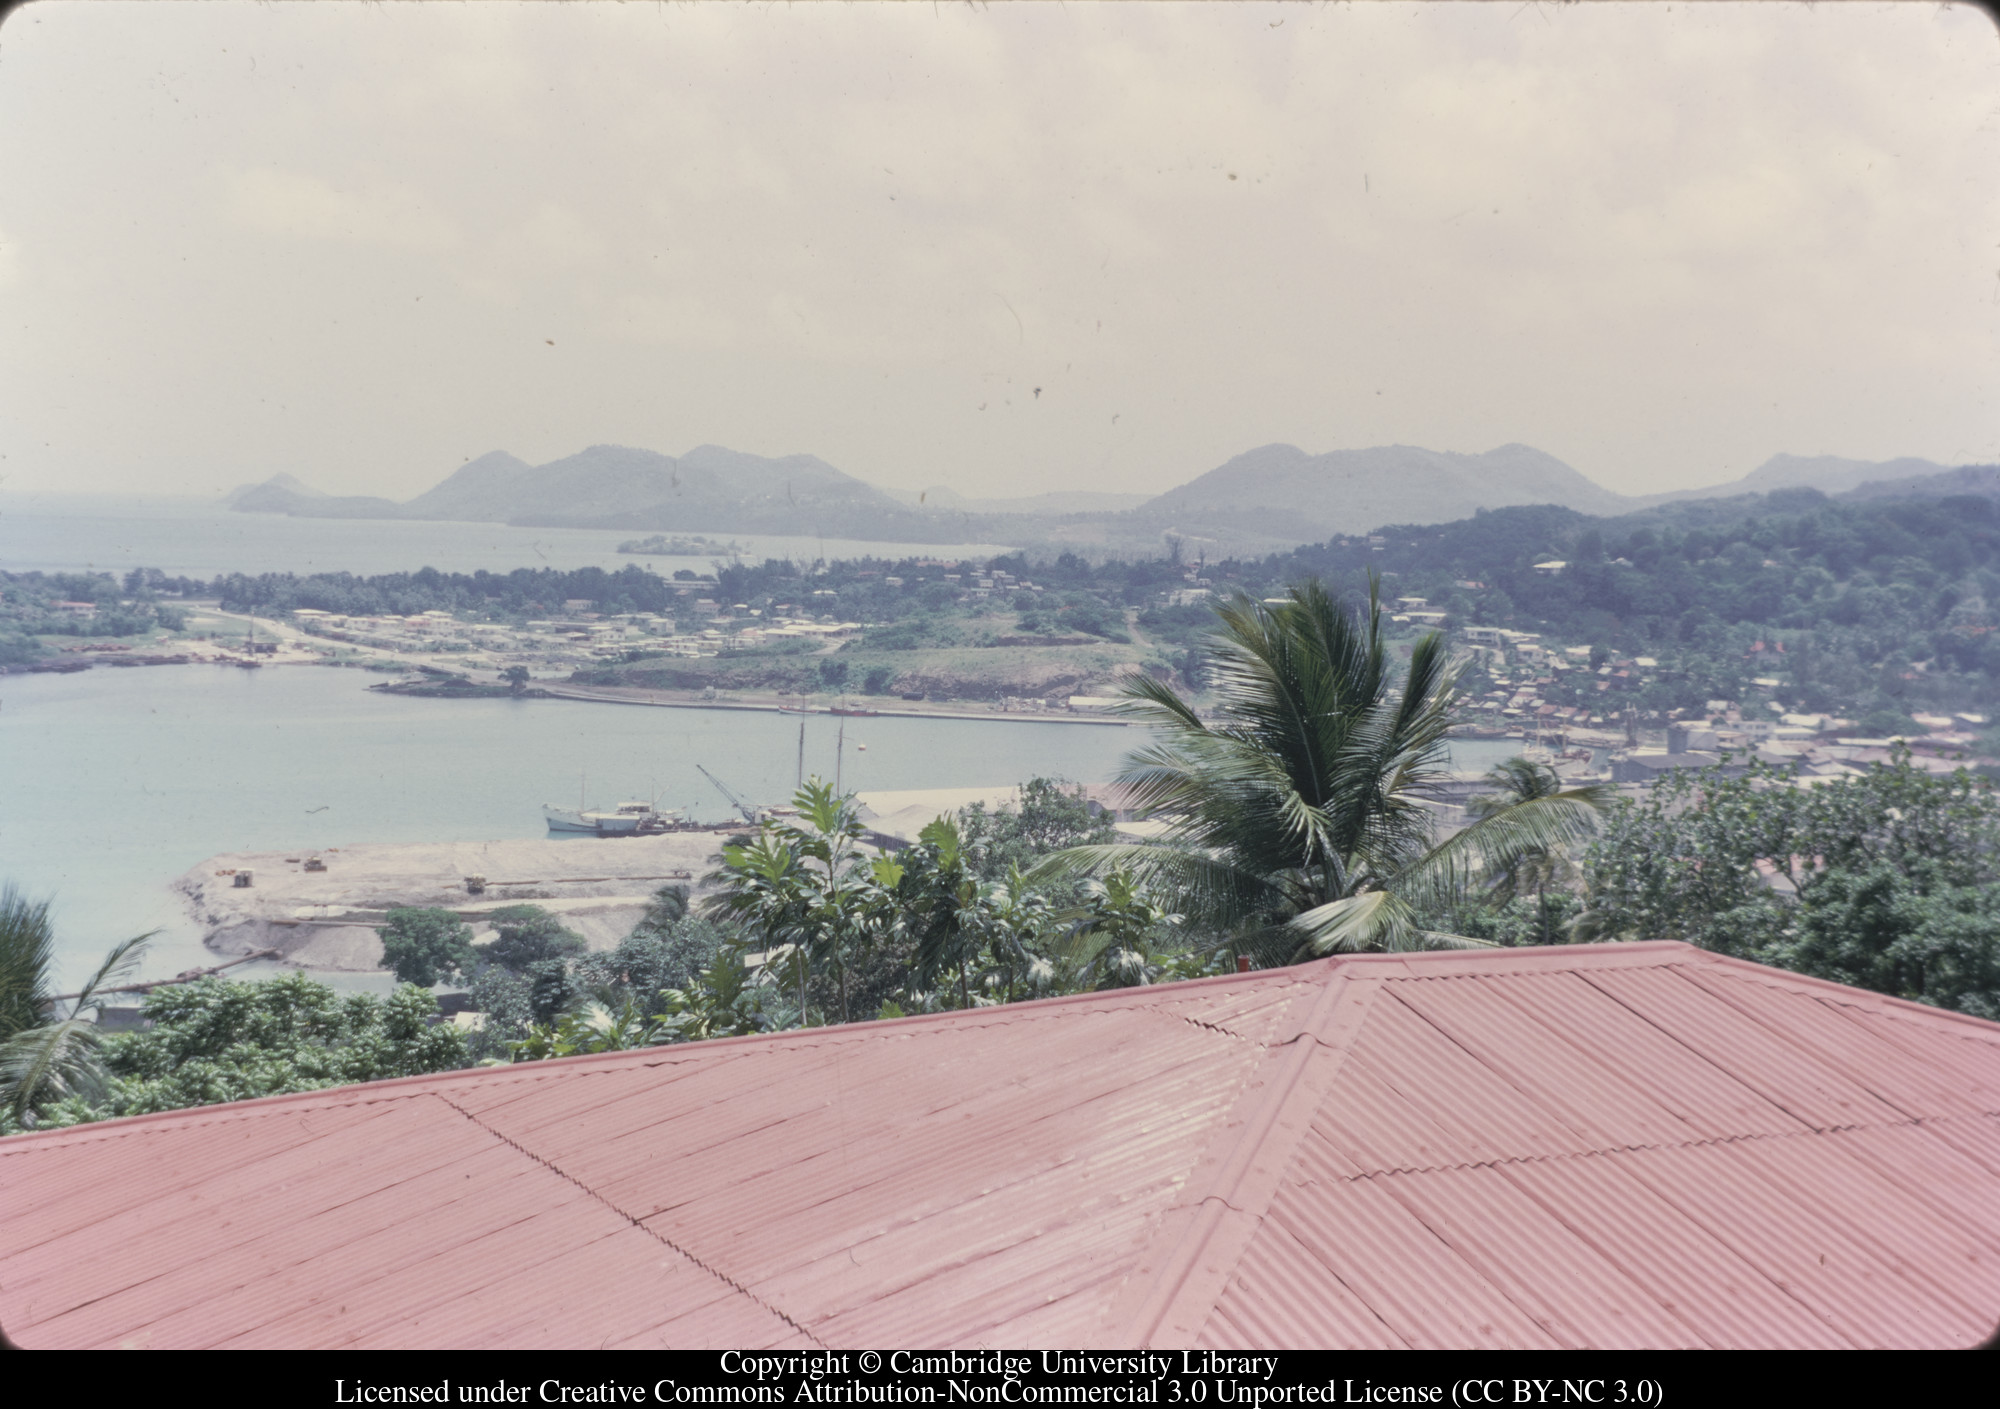 Castries Harbour from town, 1973-02